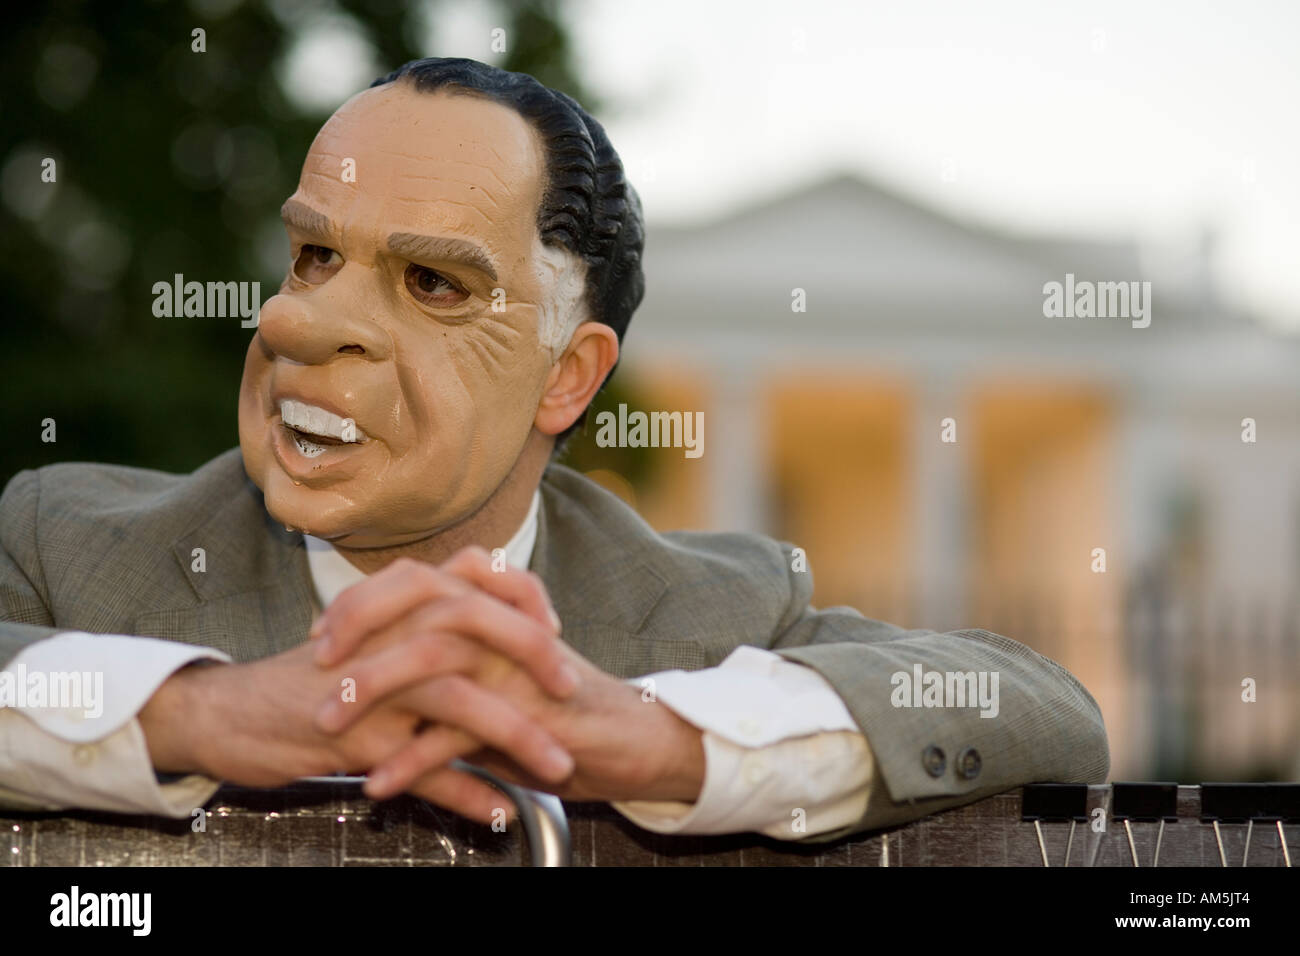 Man with Richard Nixon mask protesting the war in Iraq and the Bush administration in front of the White House Washington DC. Stock Photo